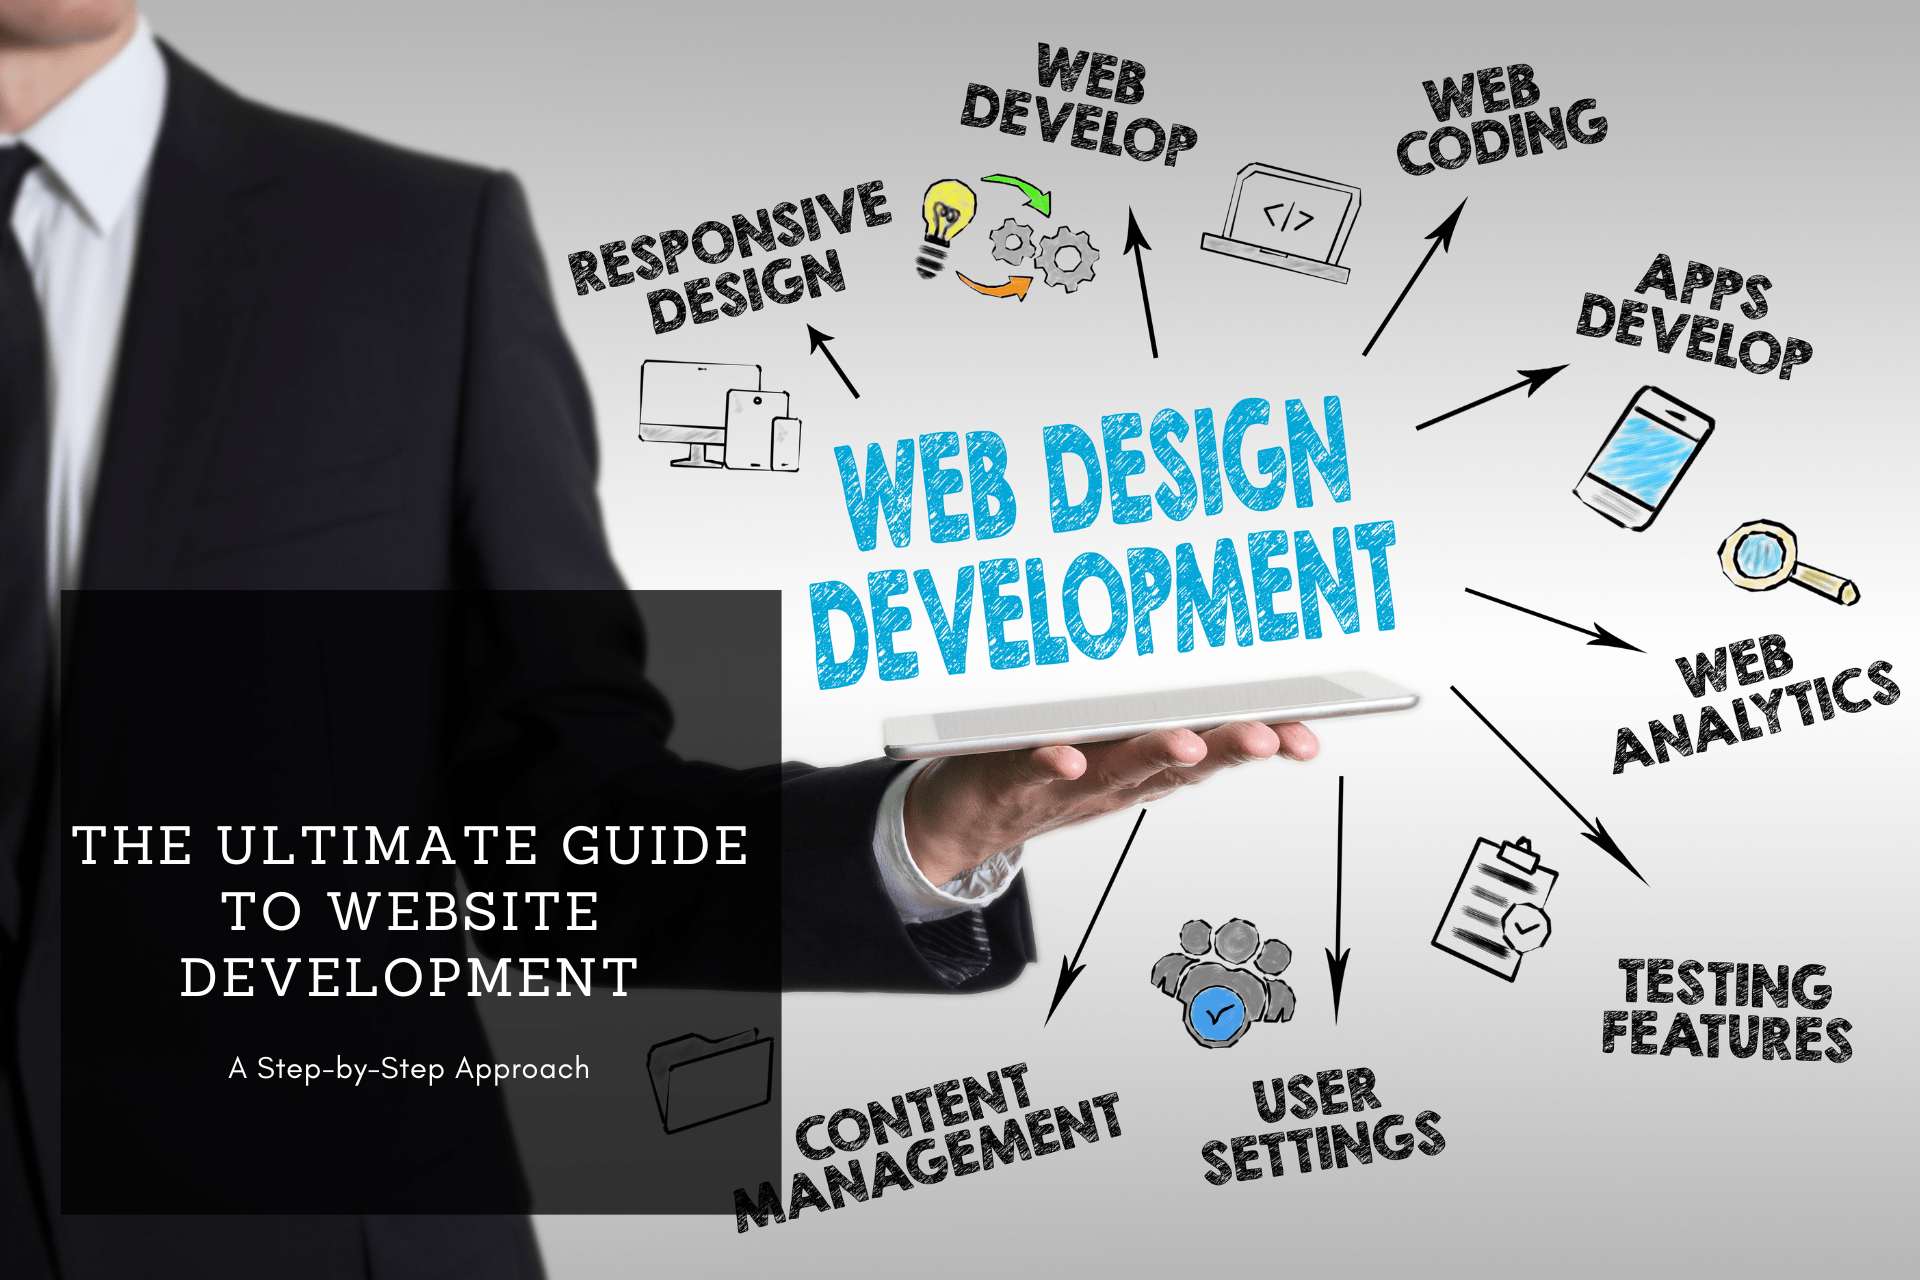 The Ultimate Guide to Website Development: Step-by-Step